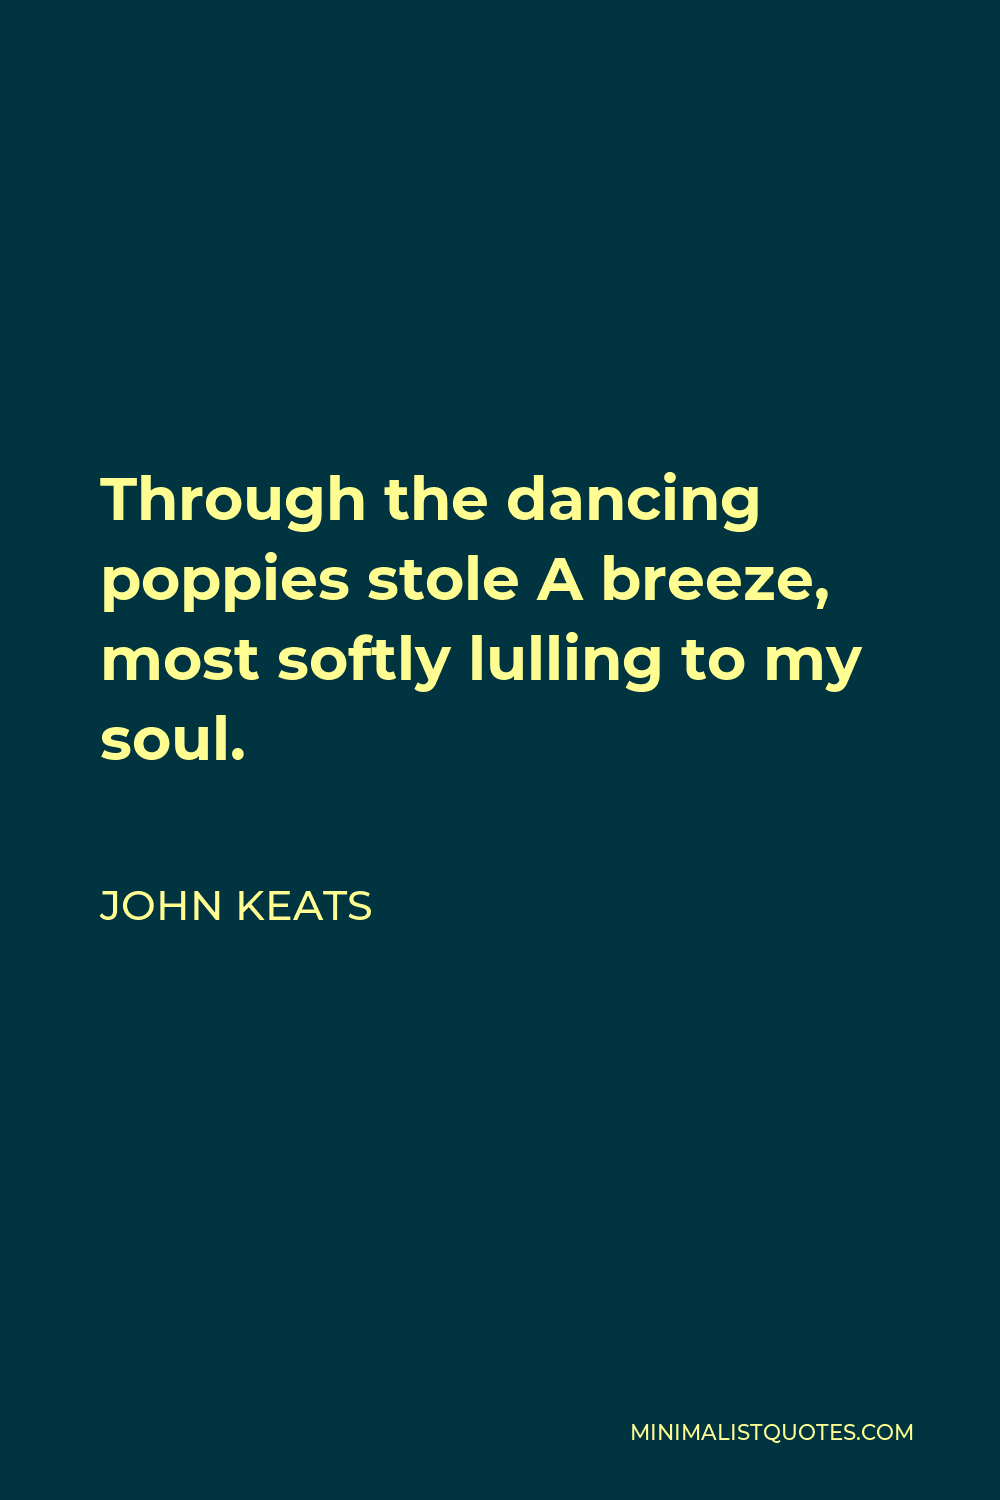 John Keats Quote - Through the dancing poppies stole A breeze, most softly lulling to my soul.